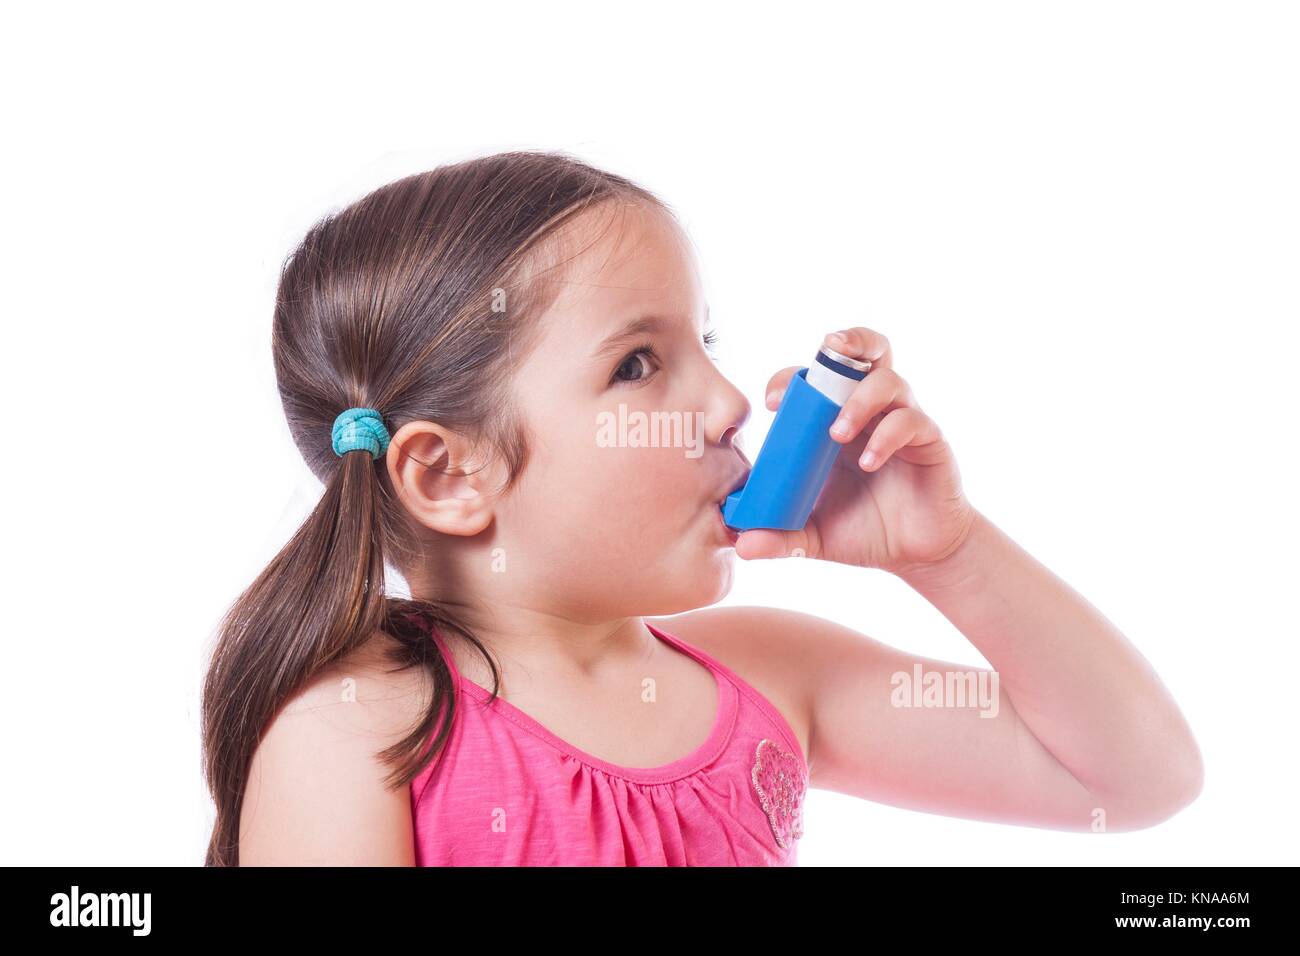 Little sick girl using medical spray for breath. Isolated over white background. Stock Photo